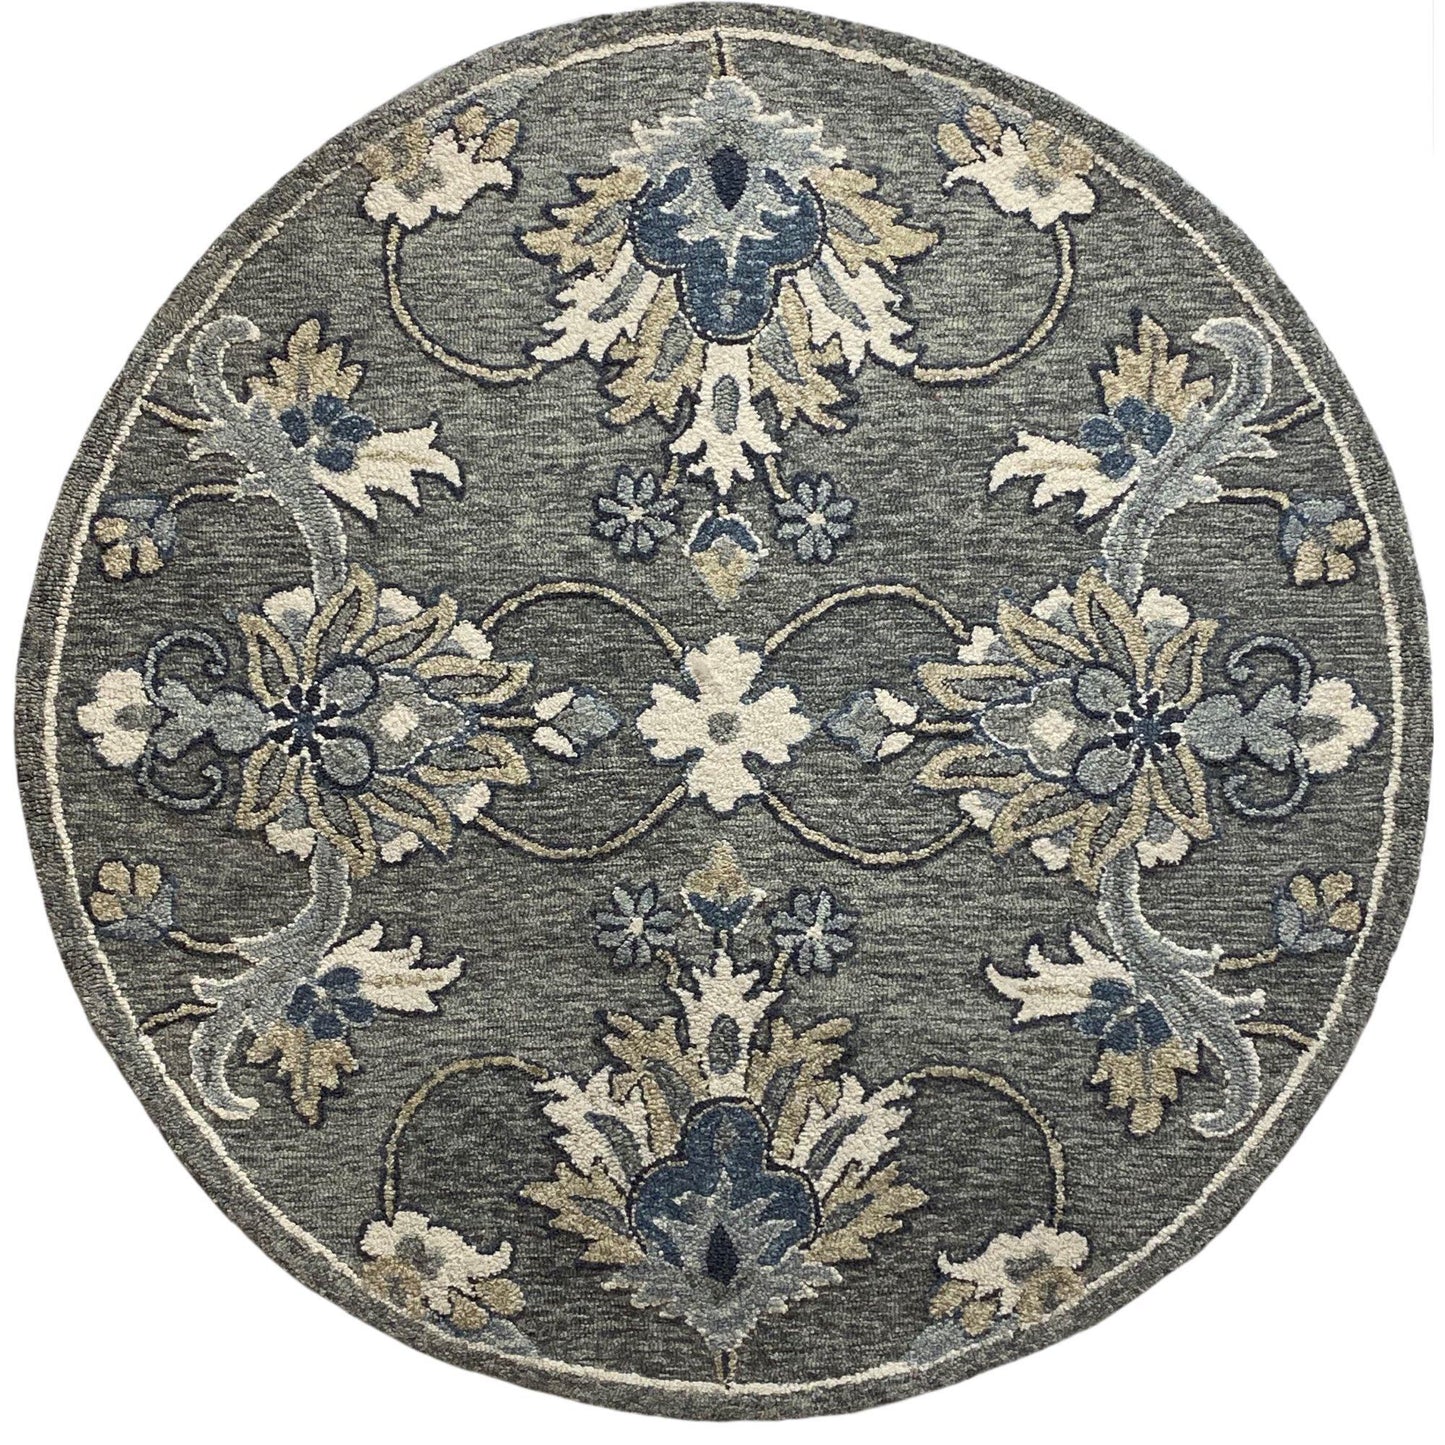 5' Round Gray Floral FIligree Area Rug